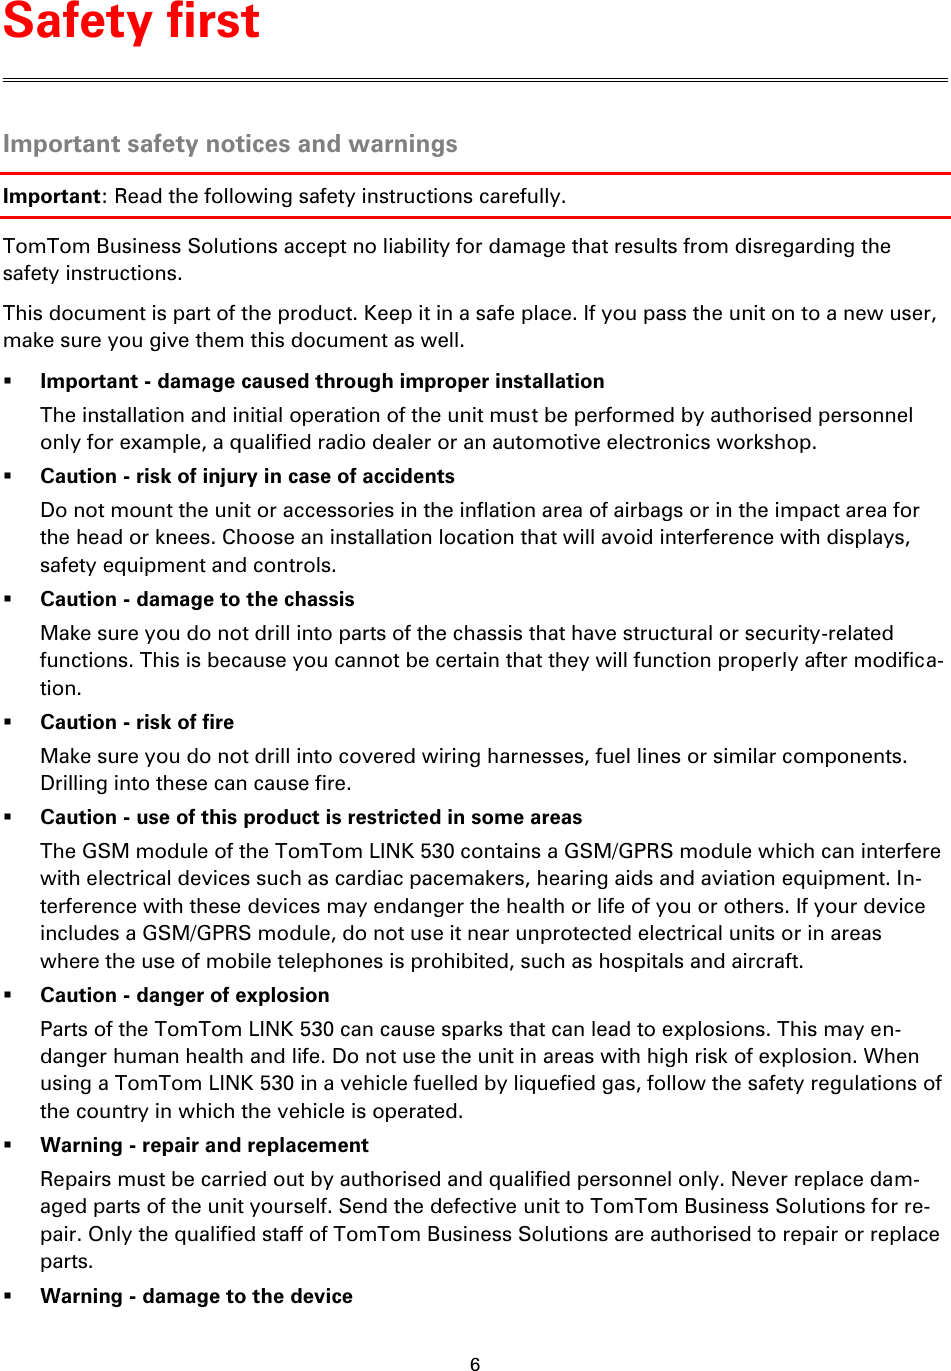 6    Important safety notices and warnings Important: Read the following safety instructions carefully. TomTom Business Solutions accept no liability for damage that results from disregarding the safety instructions. This document is part of the product. Keep it in a safe place. If you pass the unit on to a new user, make sure you give them this document as well.  Important - damage caused through improper installation The installation and initial operation of the unit must be performed by authorised personnel only for example, a qualified radio dealer or an automotive electronics workshop.  Caution - risk of injury in case of accidents Do not mount the unit or accessories in the inflation area of airbags or in the impact area for the head or knees. Choose an installation location that will avoid interference with displays, safety equipment and controls.  Caution - damage to the chassis Make sure you do not drill into parts of the chassis that have structural or security-related functions. This is because you cannot be certain that they will function properly after modifica-tion.  Caution - risk of fire Make sure you do not drill into covered wiring harnesses, fuel lines or similar components. Drilling into these can cause fire.  Caution - use of this product is restricted in some areas The GSM module of the TomTom LINK 530 contains a GSM/GPRS module which can interfere with electrical devices such as cardiac pacemakers, hearing aids and aviation equipment. In-terference with these devices may endanger the health or life of you or others. If your device includes a GSM/GPRS module, do not use it near unprotected electrical units or in areas where the use of mobile telephones is prohibited, such as hospitals and aircraft.  Caution - danger of explosion Parts of the TomTom LINK 530 can cause sparks that can lead to explosions. This may en-danger human health and life. Do not use the unit in areas with high risk of explosion. When using a TomTom LINK 530 in a vehicle fuelled by liquefied gas, follow the safety regulations of the country in which the vehicle is operated.  Warning - repair and replacement Repairs must be carried out by authorised and qualified personnel only. Never replace dam-aged parts of the unit yourself. Send the defective unit to TomTom Business Solutions for re-pair. Only the qualified staff of TomTom Business Solutions are authorised to repair or replace parts.  Warning - damage to the device Safety first 